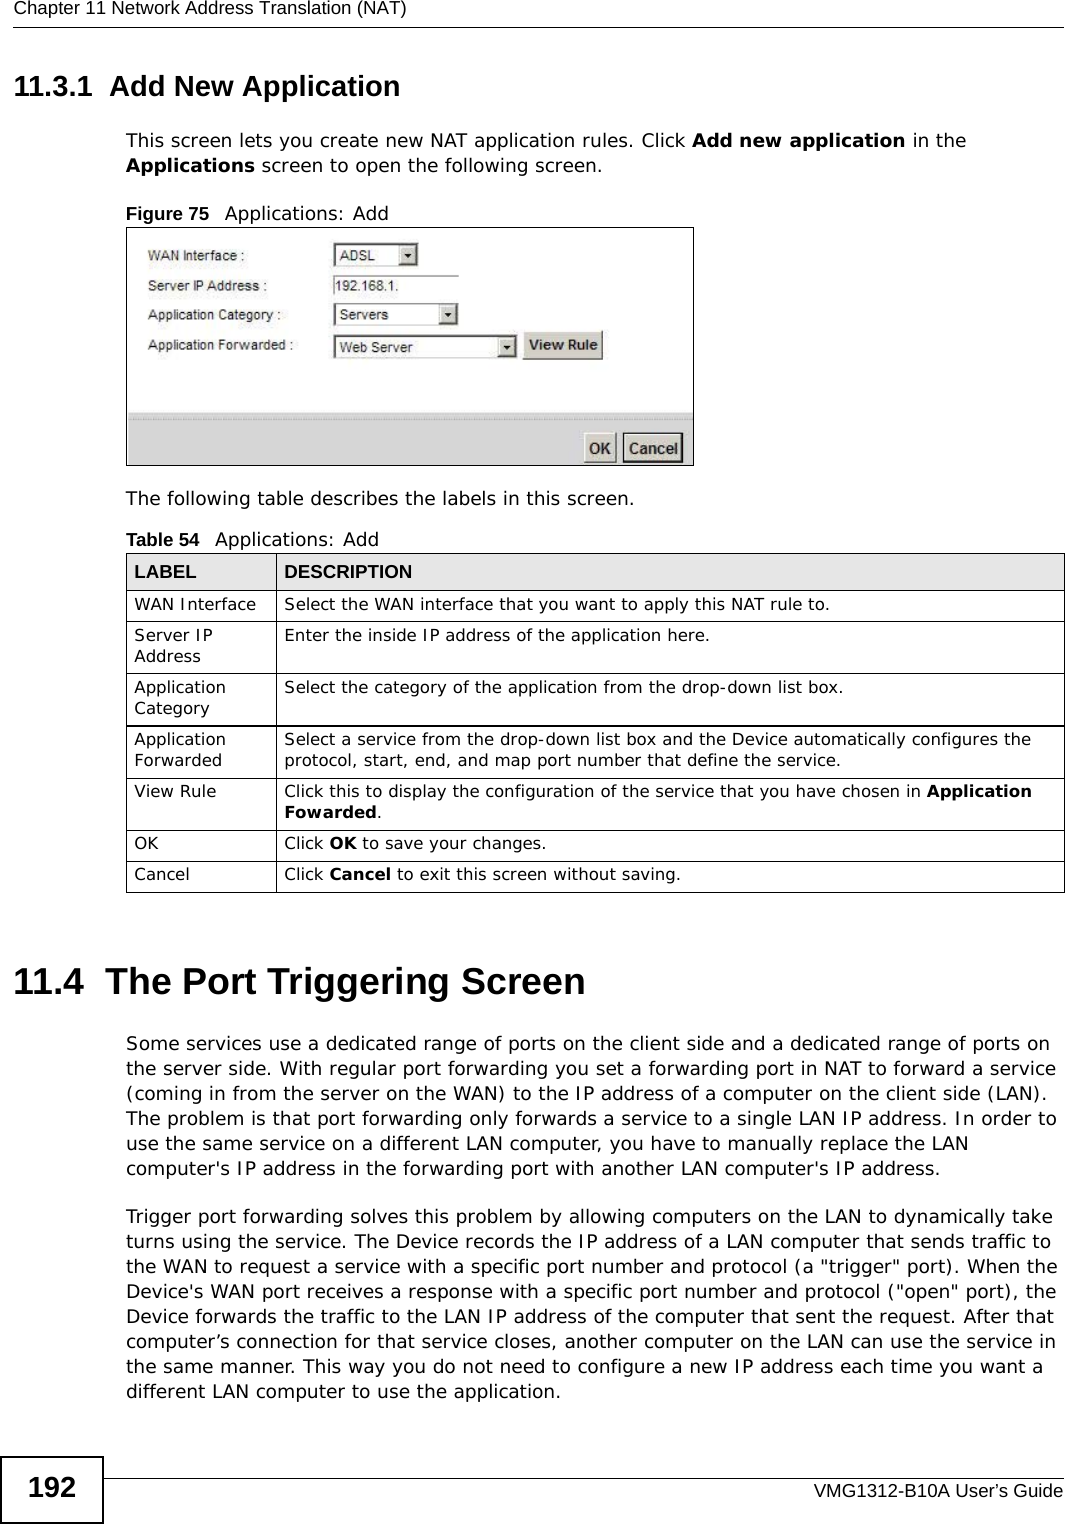 Chapter 11 Network Address Translation (NAT)VMG1312-B10A User’s Guide19211.3.1  Add New ApplicationThis screen lets you create new NAT application rules. Click Add new application in the Applications screen to open the following screen.Figure 75   Applications: Add The following table describes the labels in this screen. 11.4  The Port Triggering ScreenSome services use a dedicated range of ports on the client side and a dedicated range of ports on the server side. With regular port forwarding you set a forwarding port in NAT to forward a service (coming in from the server on the WAN) to the IP address of a computer on the client side (LAN). The problem is that port forwarding only forwards a service to a single LAN IP address. In order to use the same service on a different LAN computer, you have to manually replace the LAN computer&apos;s IP address in the forwarding port with another LAN computer&apos;s IP address. Trigger port forwarding solves this problem by allowing computers on the LAN to dynamically take turns using the service. The Device records the IP address of a LAN computer that sends traffic to the WAN to request a service with a specific port number and protocol (a &quot;trigger&quot; port). When the Device&apos;s WAN port receives a response with a specific port number and protocol (&quot;open&quot; port), the Device forwards the traffic to the LAN IP address of the computer that sent the request. After that computer’s connection for that service closes, another computer on the LAN can use the service in the same manner. This way you do not need to configure a new IP address each time you want a different LAN computer to use the application.Table 54   Applications: AddLABEL DESCRIPTIONWAN Interface Select the WAN interface that you want to apply this NAT rule to.Server IP Address Enter the inside IP address of the application here.Application Category Select the category of the application from the drop-down list box.Application Forwarded Select a service from the drop-down list box and the Device automatically configures the protocol, start, end, and map port number that define the service.View Rule Click this to display the configuration of the service that you have chosen in Application Fowarded.OK Click OK to save your changes.Cancel Click Cancel to exit this screen without saving.